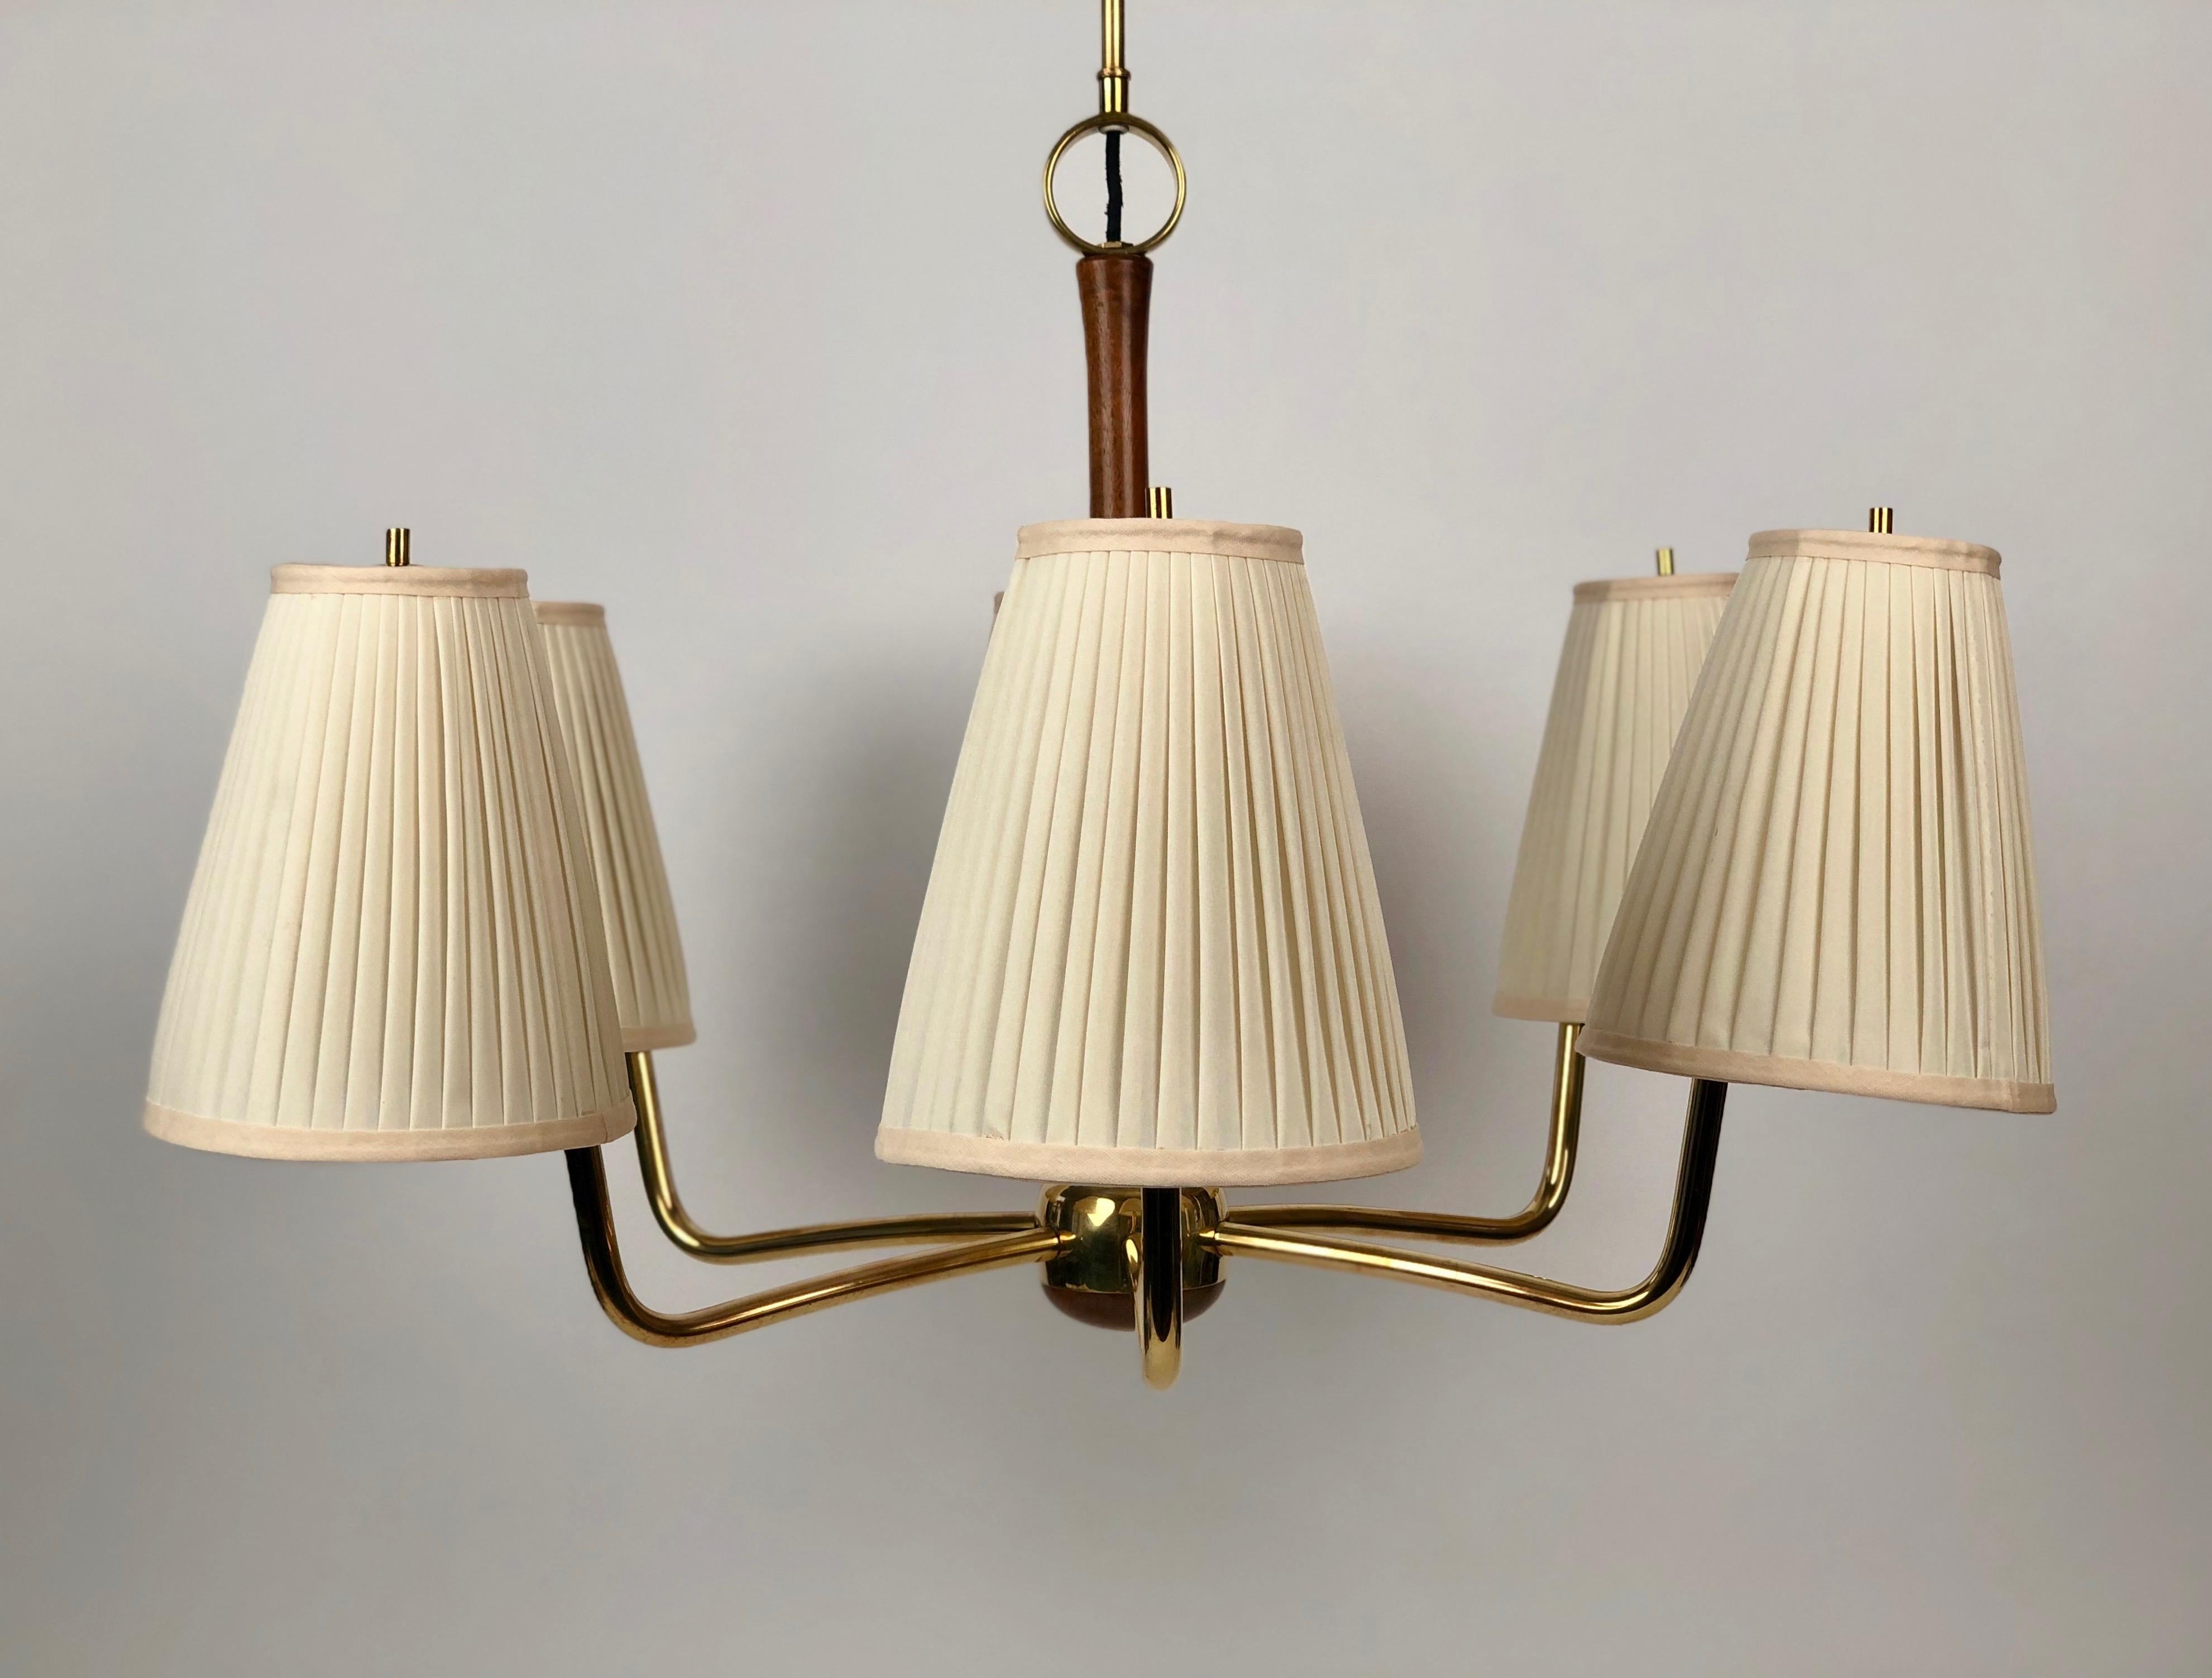 A beautiful mid-century chandelier  from Josef Frank. This six arm lamp is made of
brass with walnut accents. The combination of the walnut with the brass makes
this piece very sublime.

The shades have been recovered in silk using the original